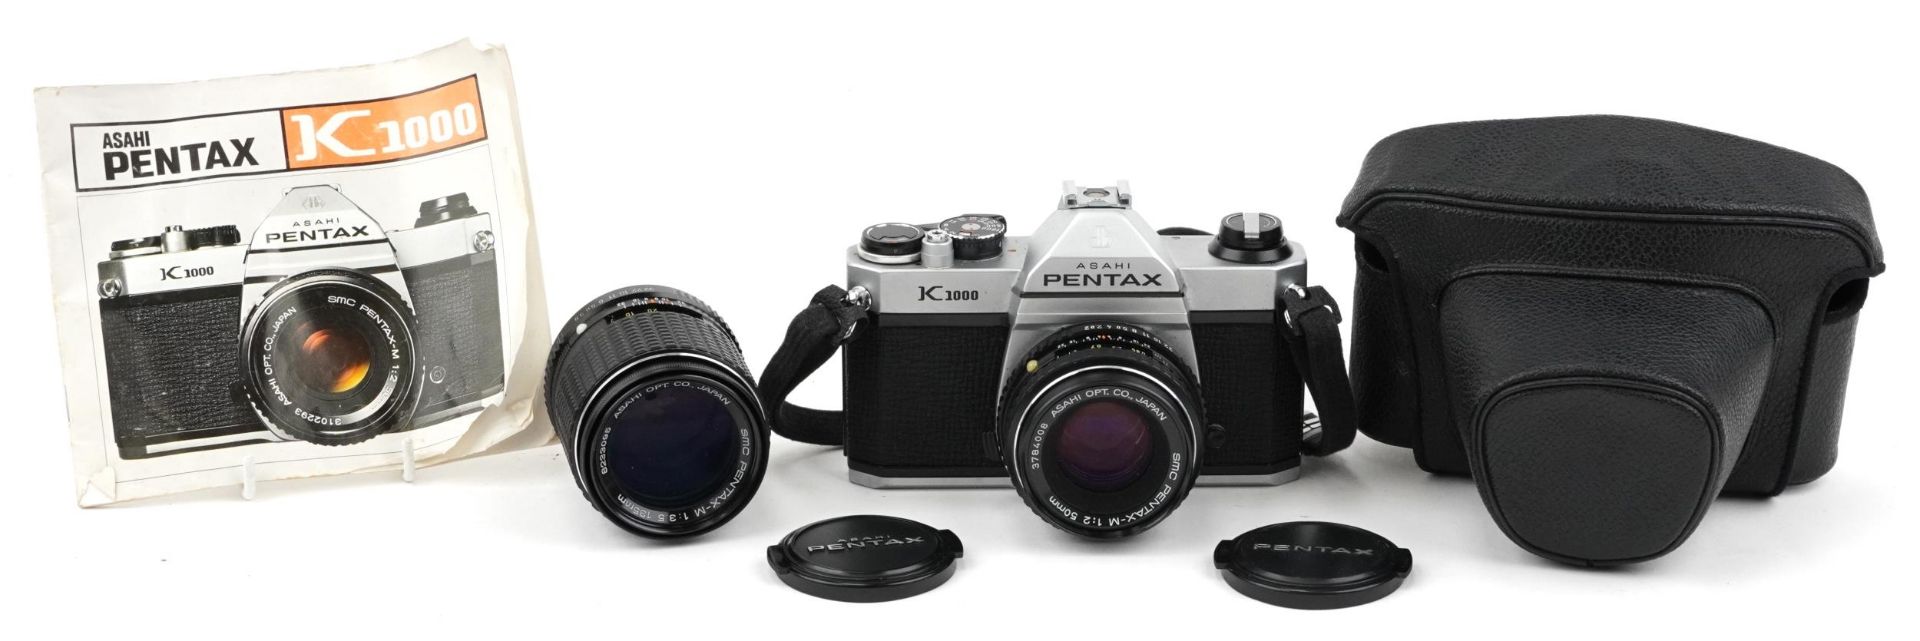 Pentax K1000 camera with additional lens : For further information on this lot please visit